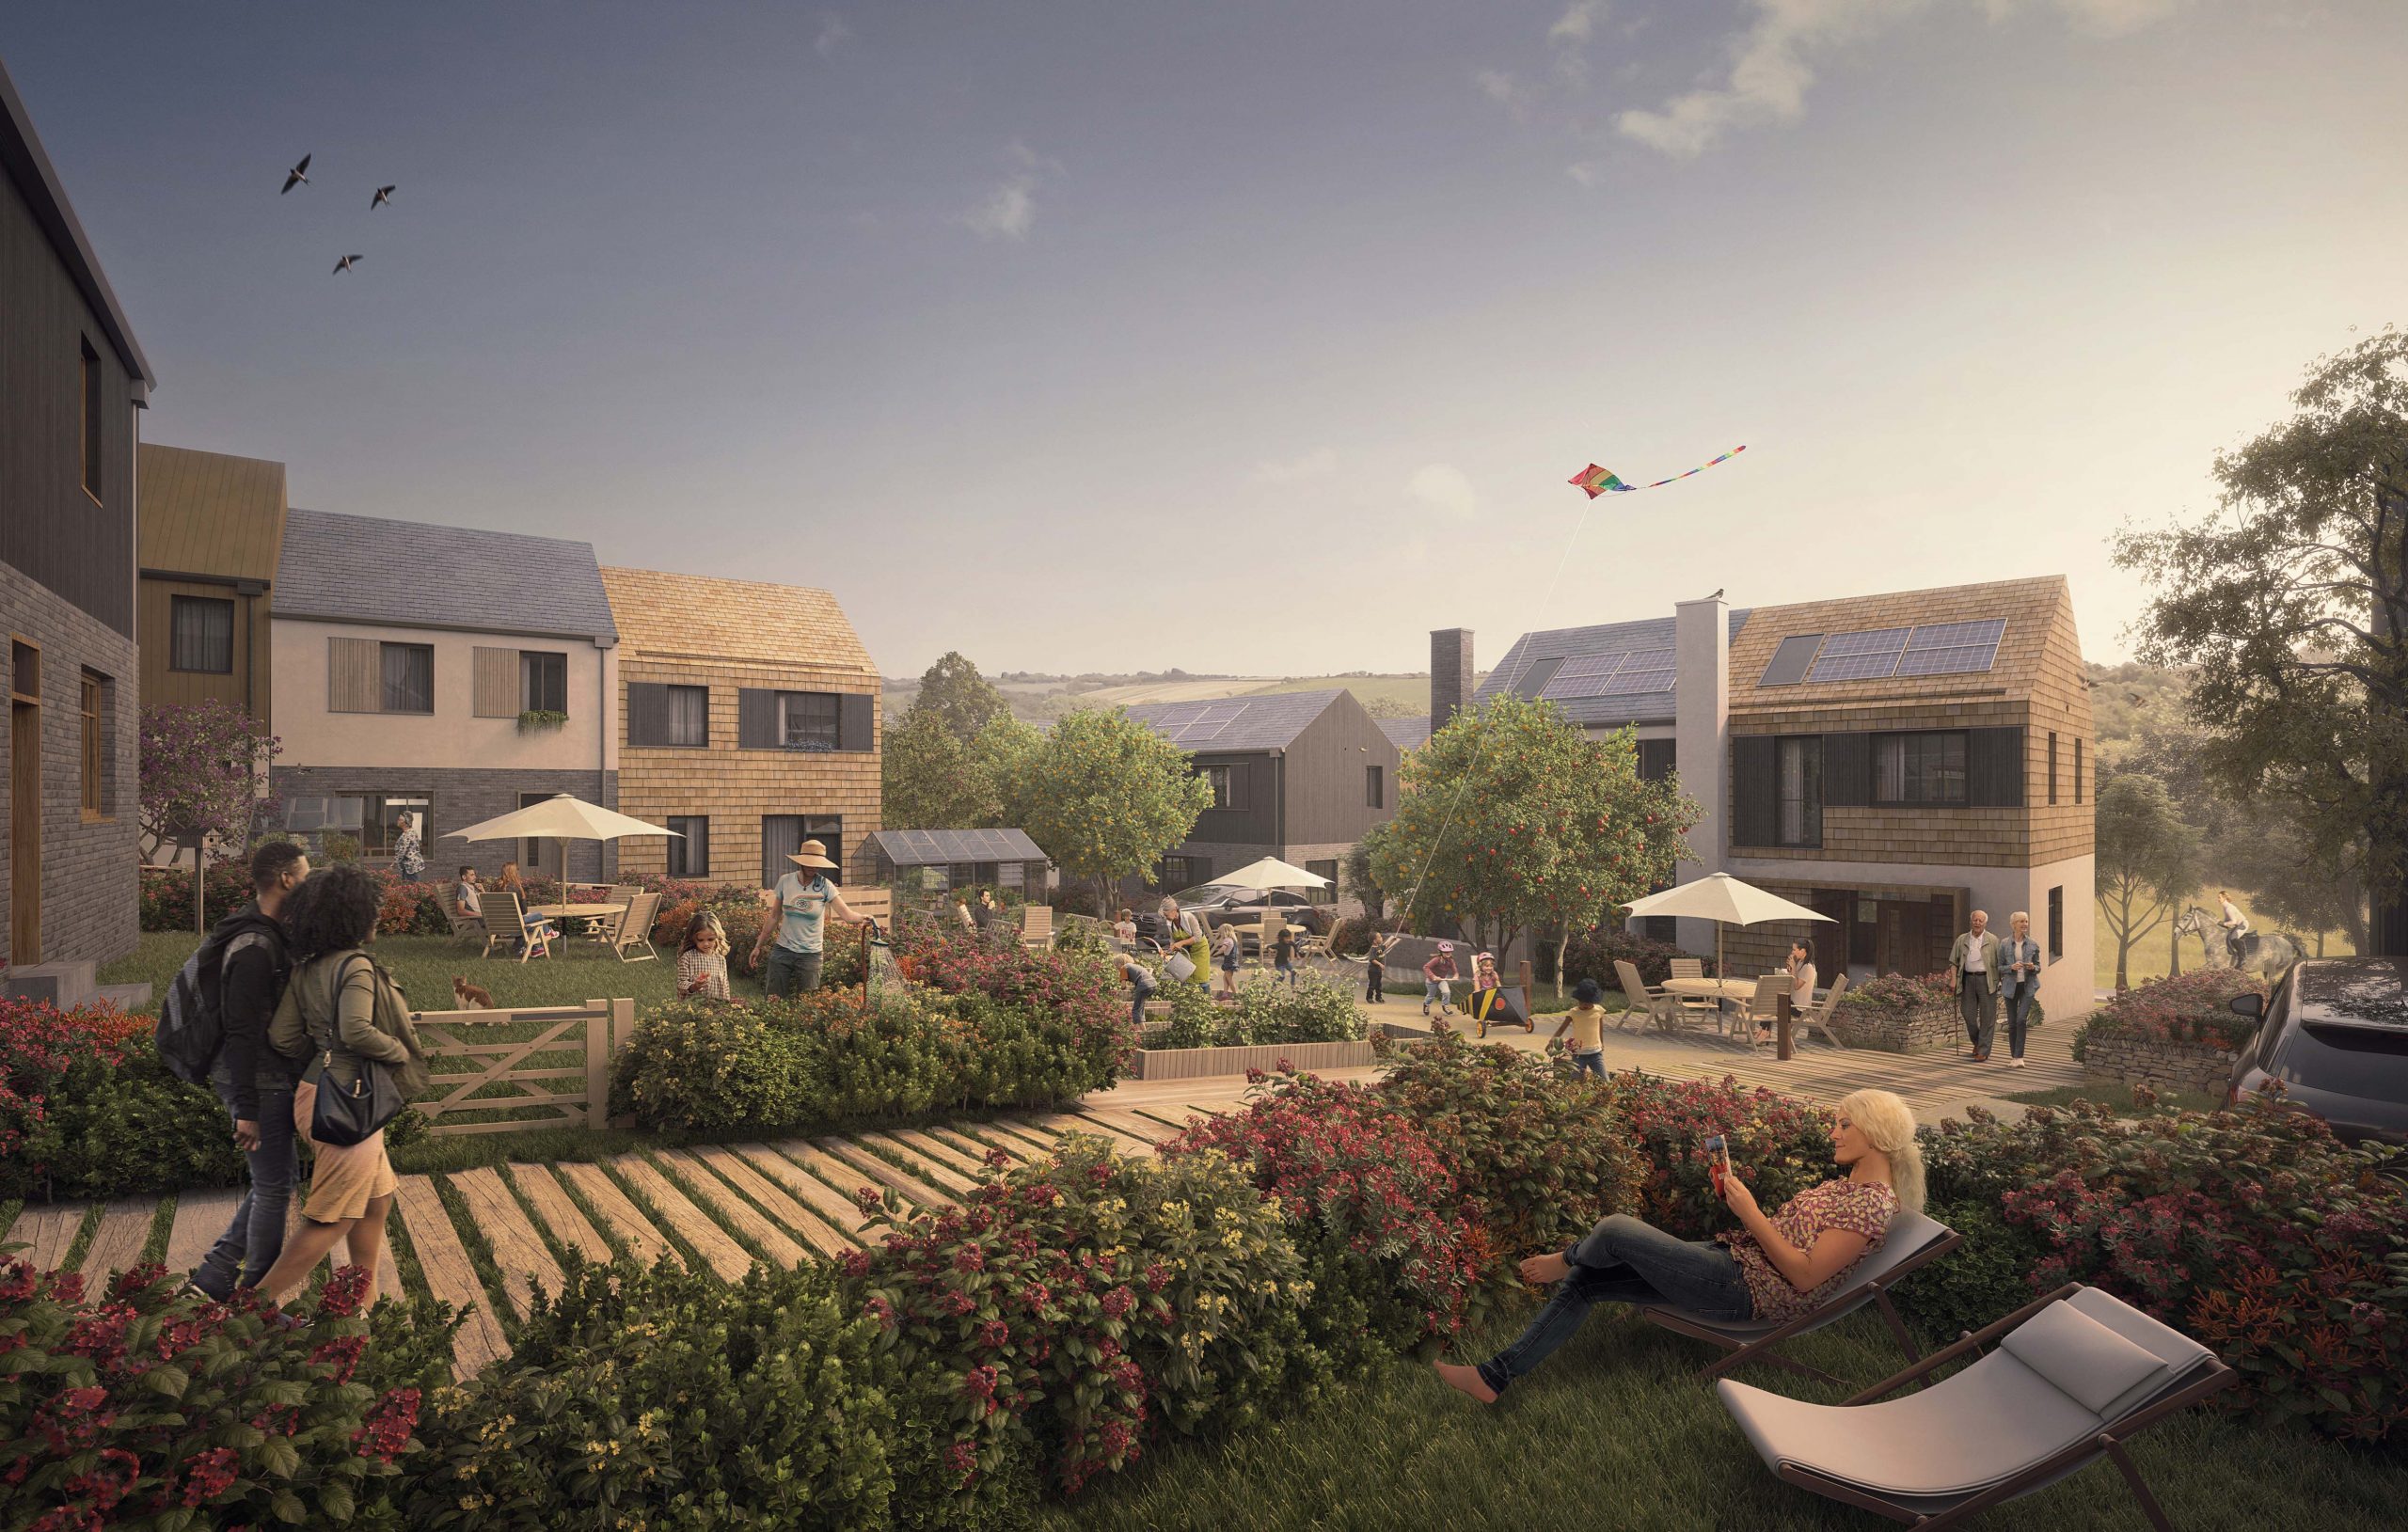 Plans for Langarth Garden Village given the go ahead